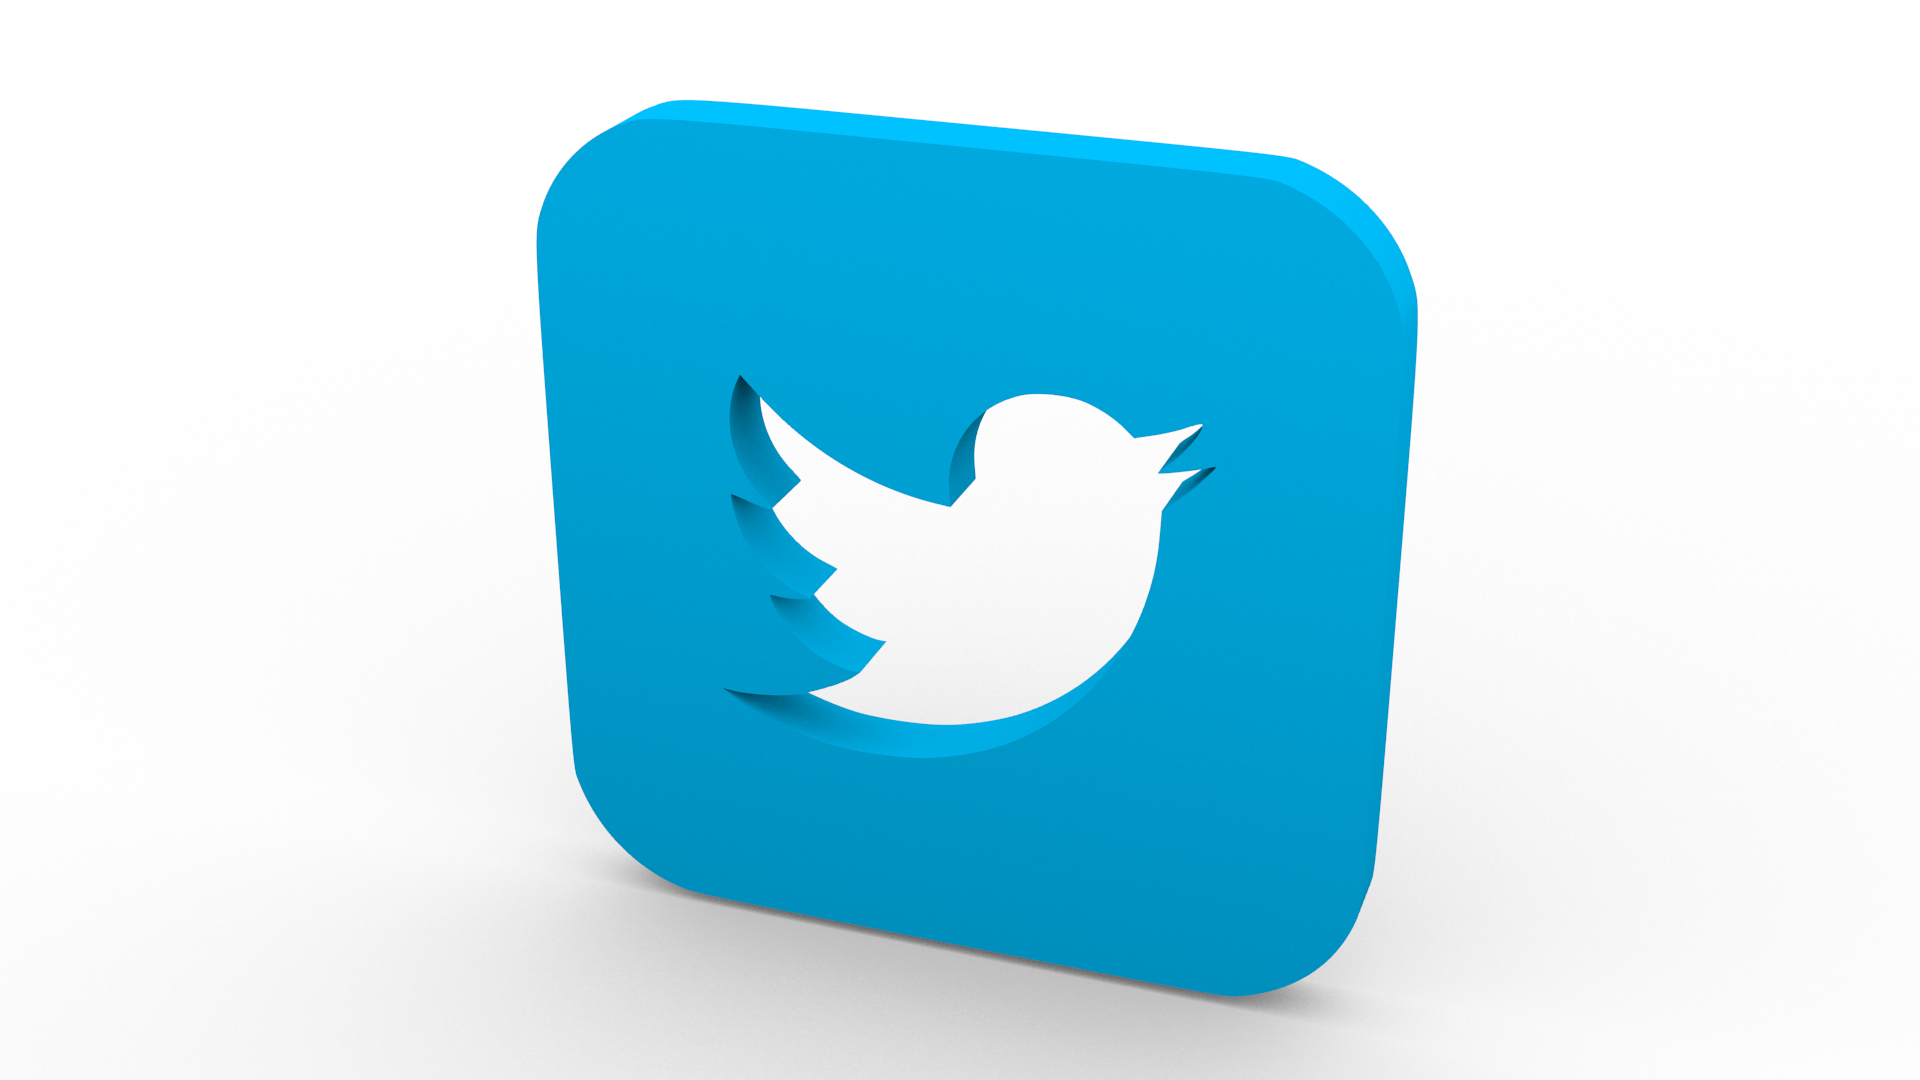 A cutout of the Twitter logo, published to: "3 Twitter Marketing Strategy Tips for Small Businesses and Non-Profits"